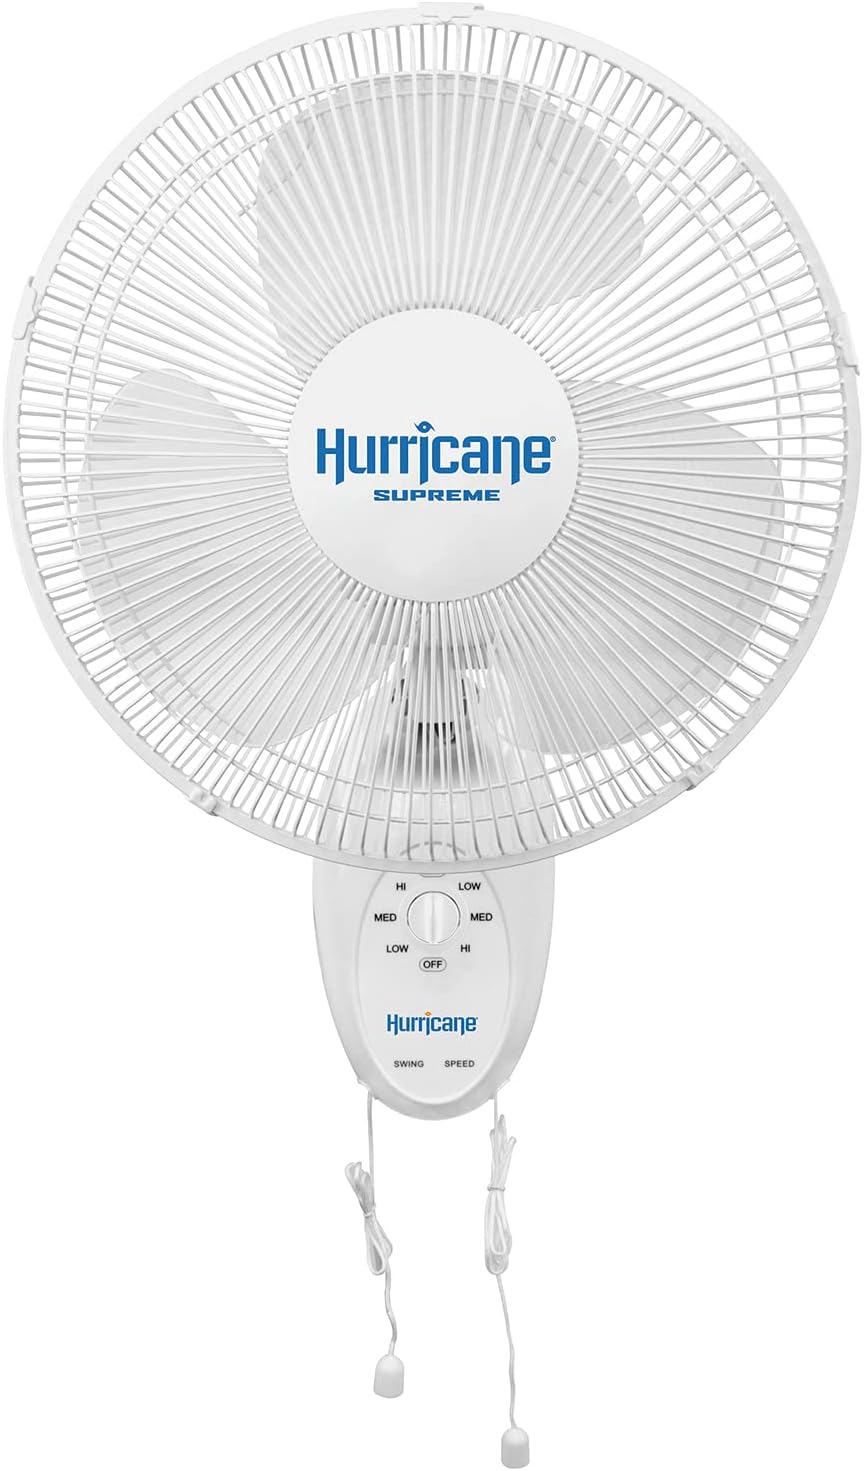 Hurricane Supreme 12 Inch Oscillating Wall Mount Fan with 3 Speed Settings and 90 Degree Oscillation, White